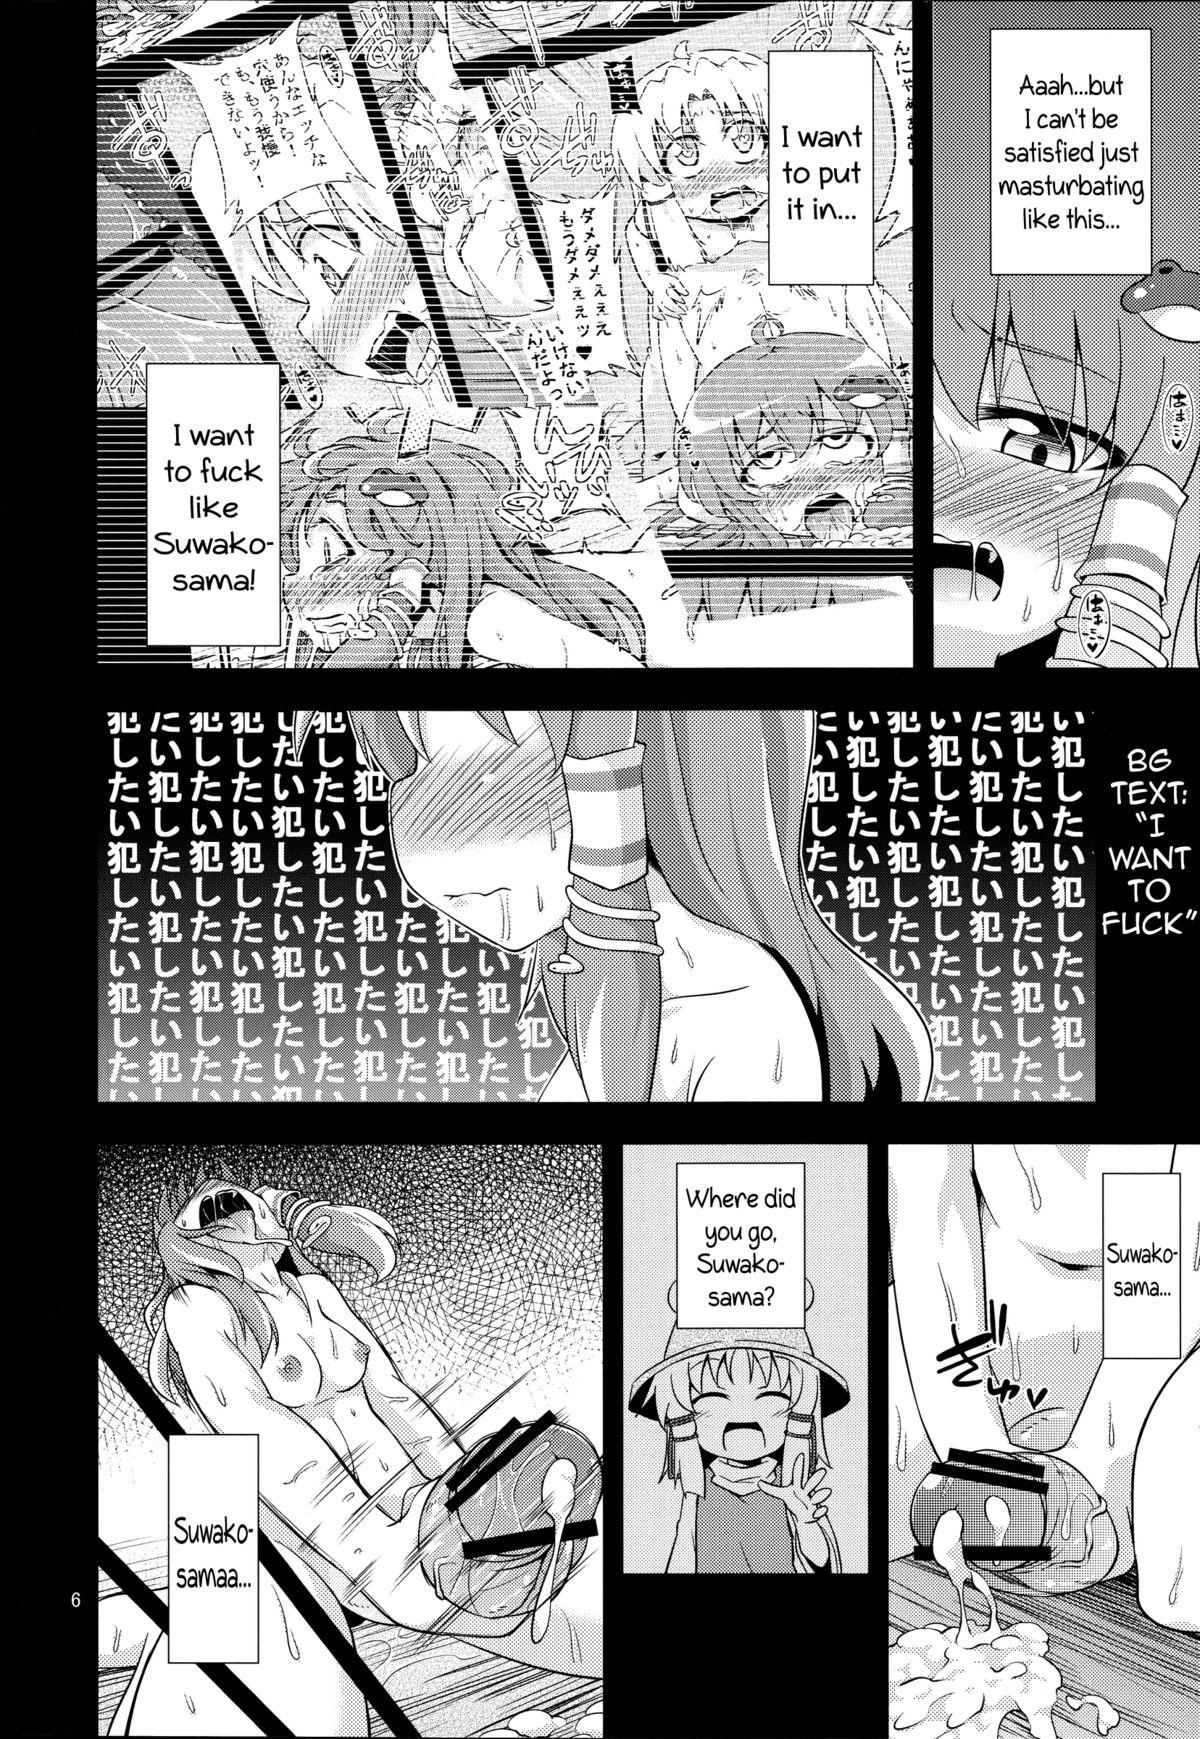 Fake Nikuyokugami Gyoushin ‐ Shrine maiden x Lechery maidens ‐ | Faith in the God of Carnal Desire - Touhou project Jerkoff - Page 5